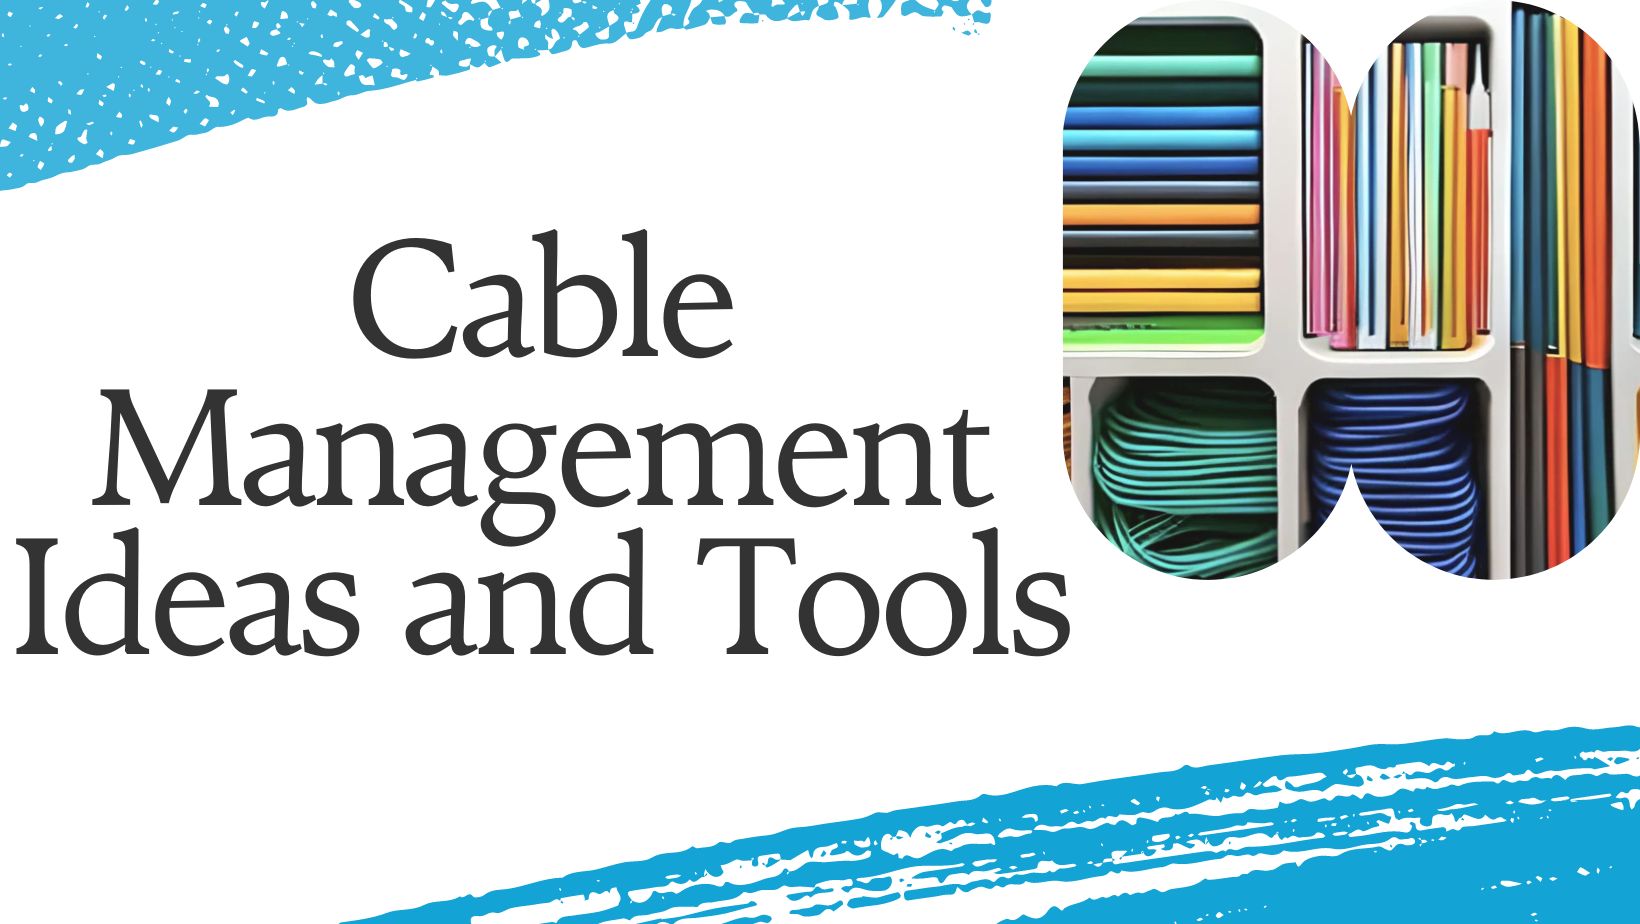 Comprehensive Guide to Cable Management Ideas and Tools